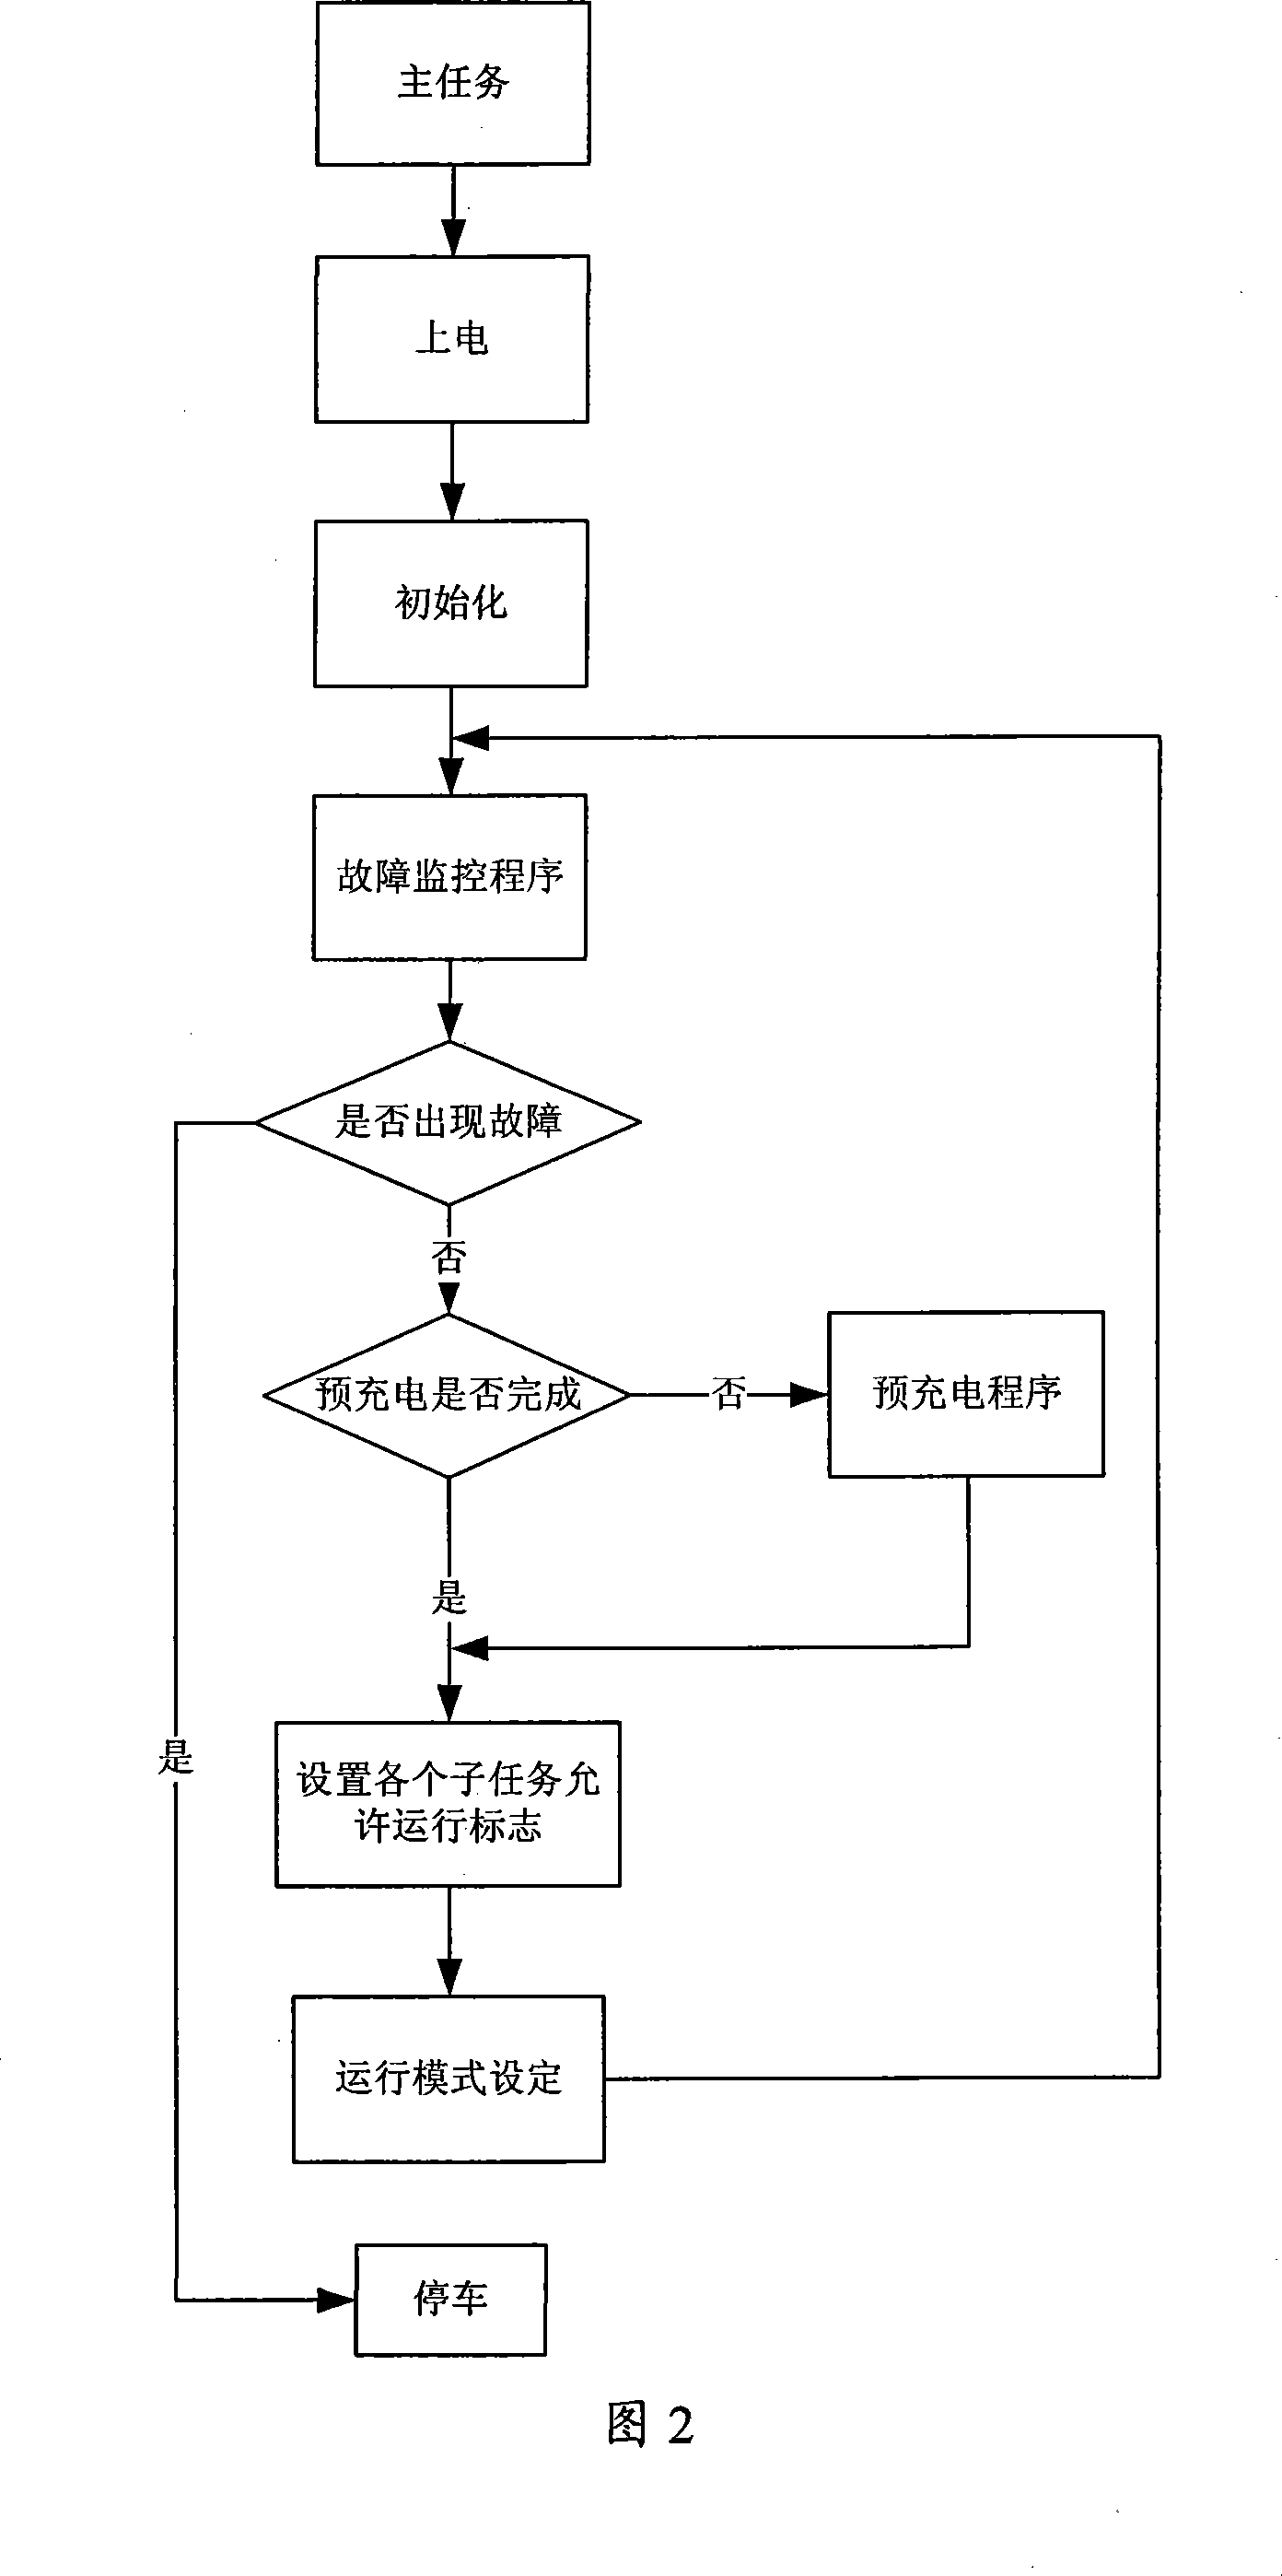 Control method for built-in operating system for wharf truck-tractor